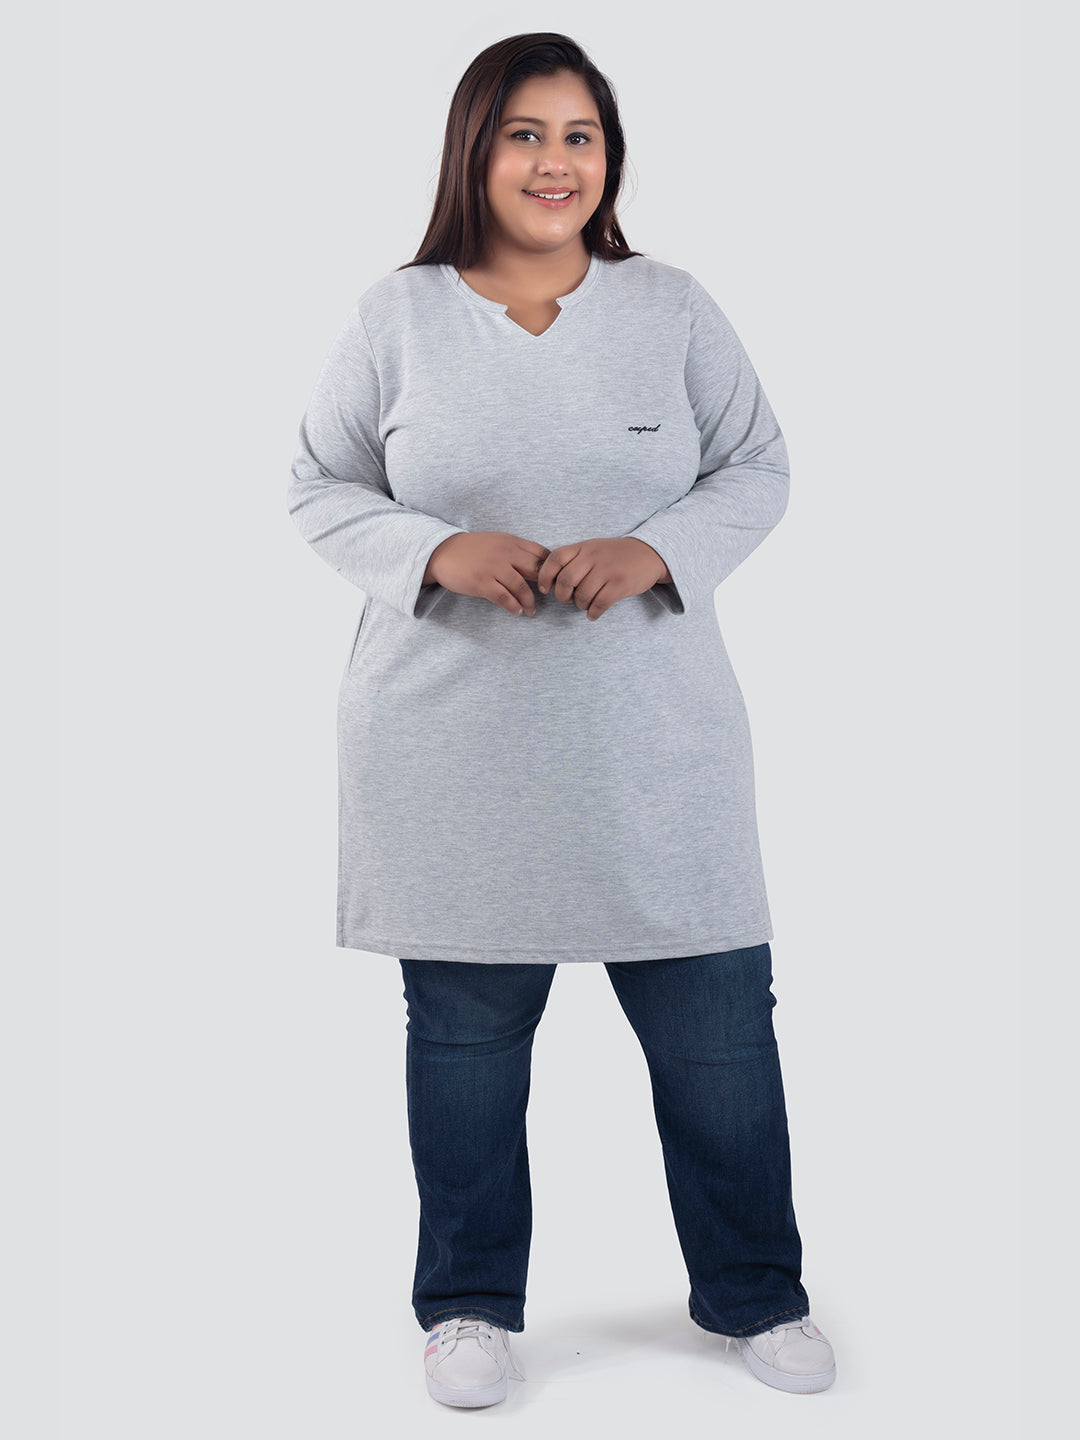 Stylish Grey Cotton Plus Size Full Sleeves Long Top For Women Online In India